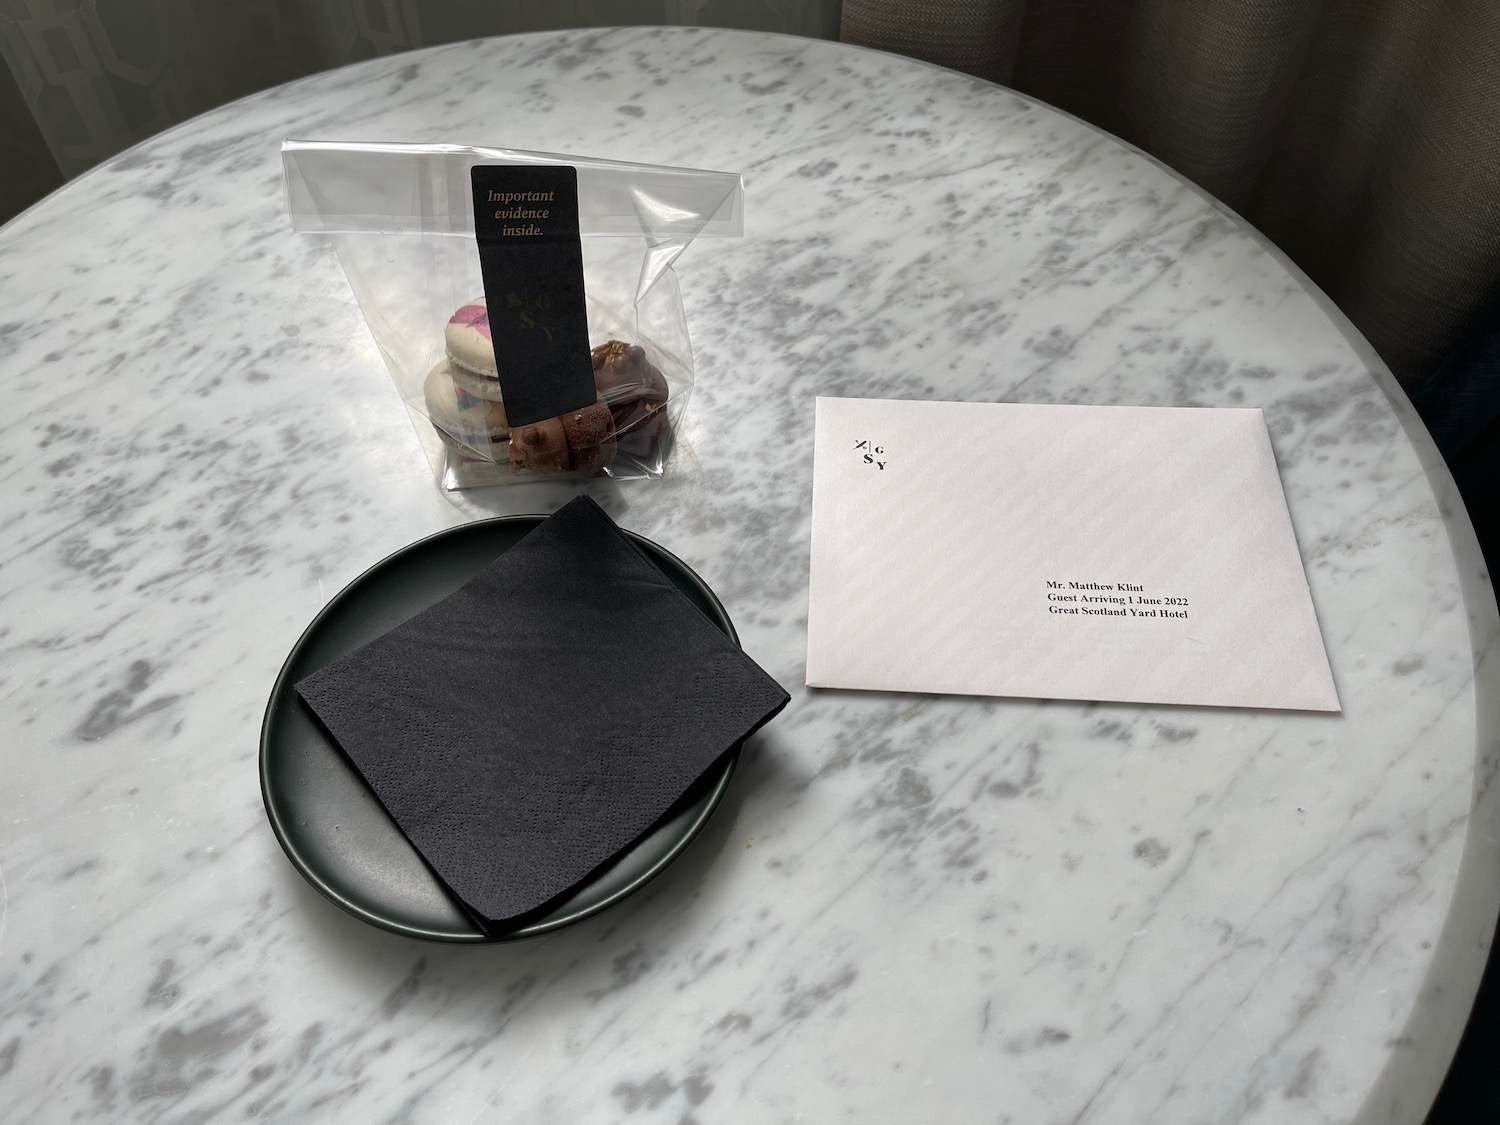 a plate with a black napkin next to a white envelope on a marble table